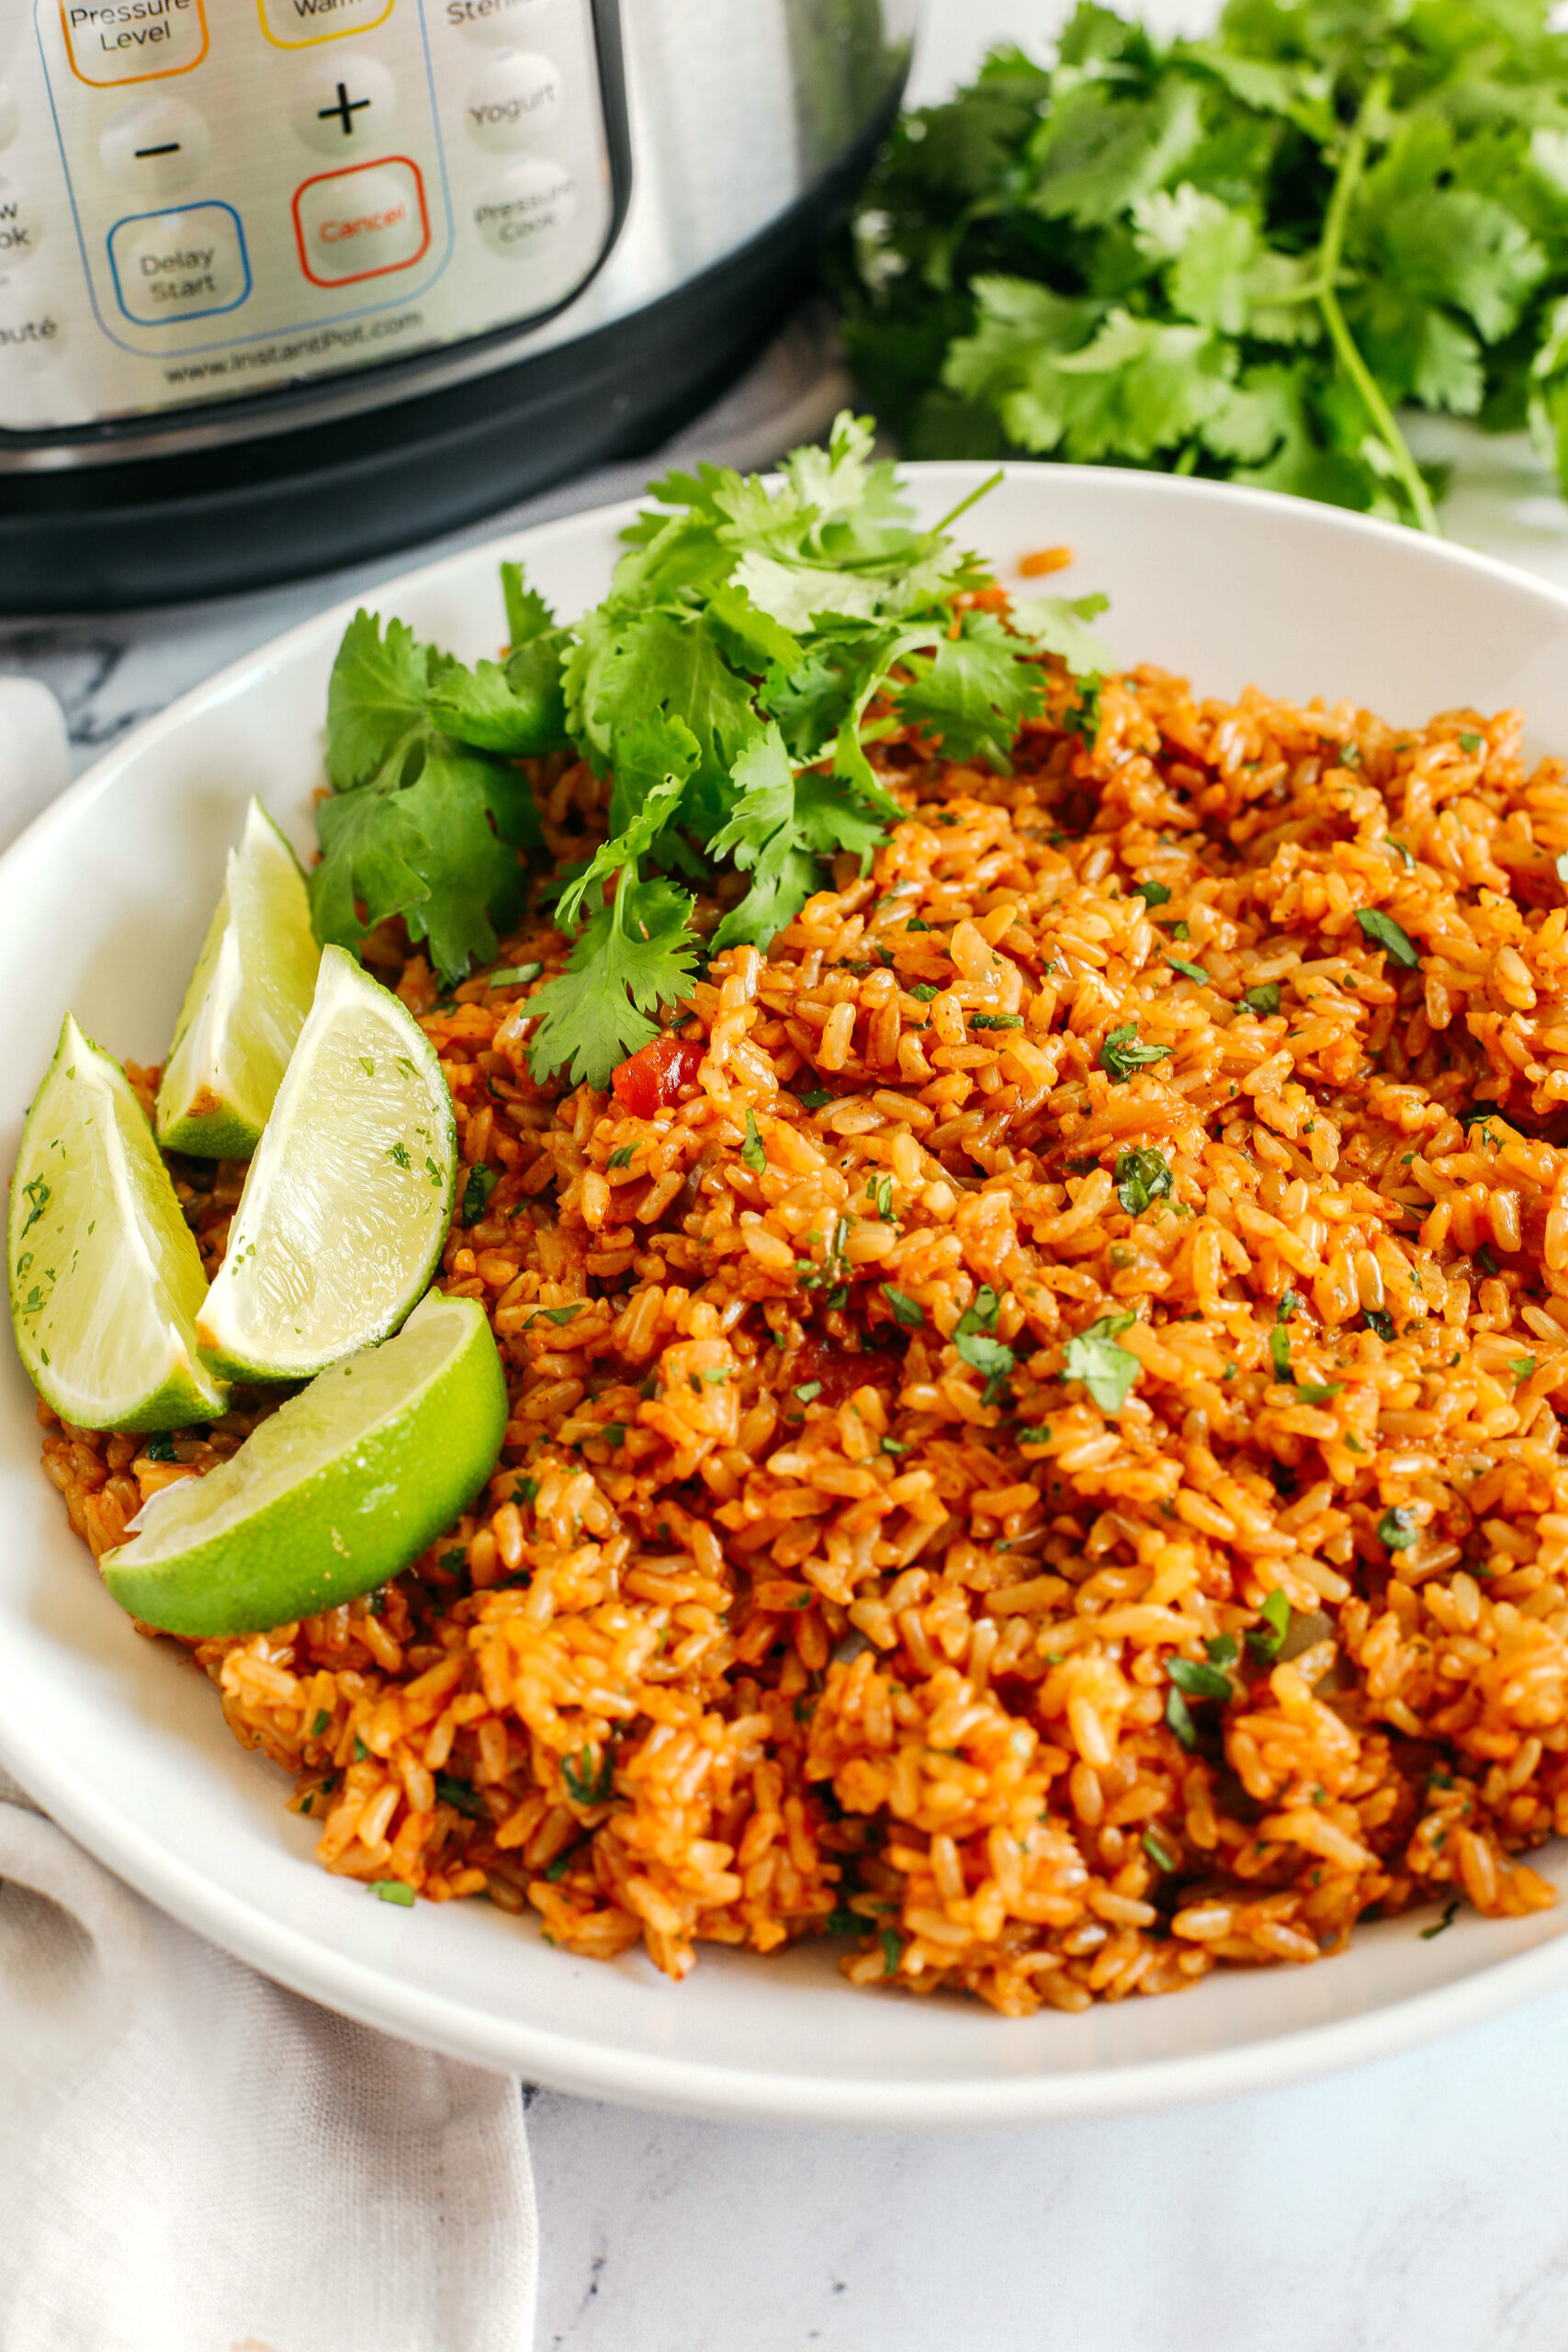 Super flavorful Mexican Brown Rice easily made right in your Instant Pot along with your favorite salsa for the perfect side dish that comes out perfectly fluffy and delicious every single time!